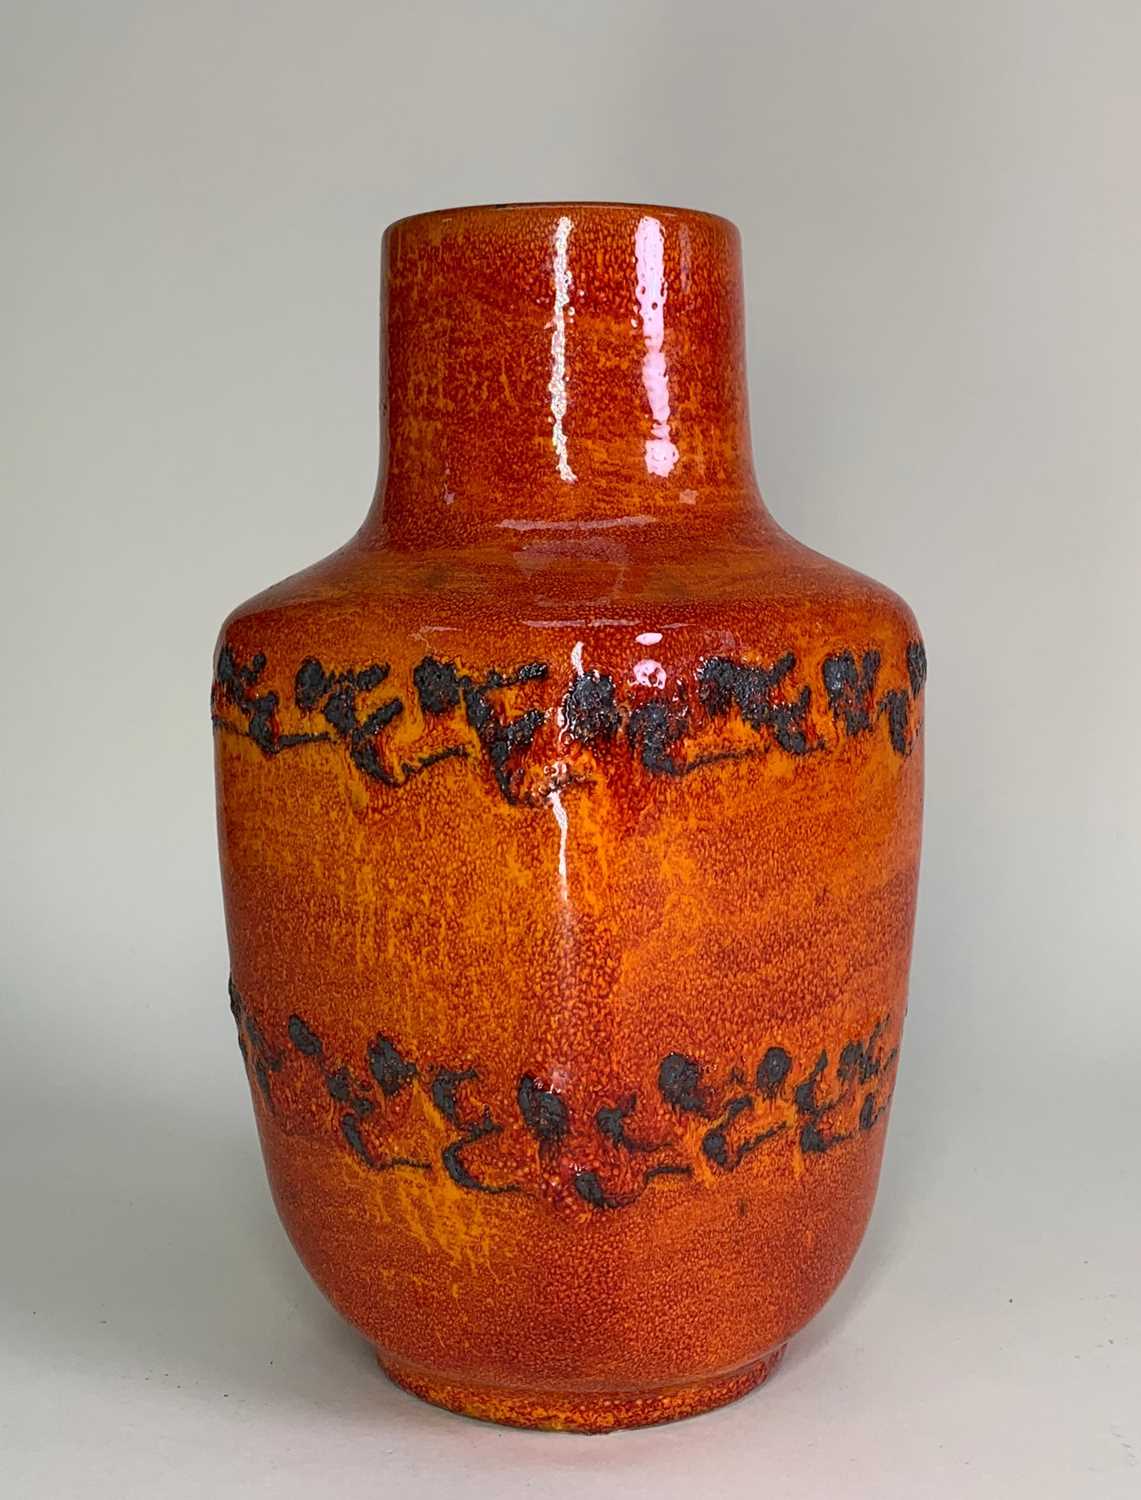 MID CENTURY POTTERY WGP KERAMICS COLLECTION including one Scheurich 275-28 solid red glazed vase - Image 5 of 20